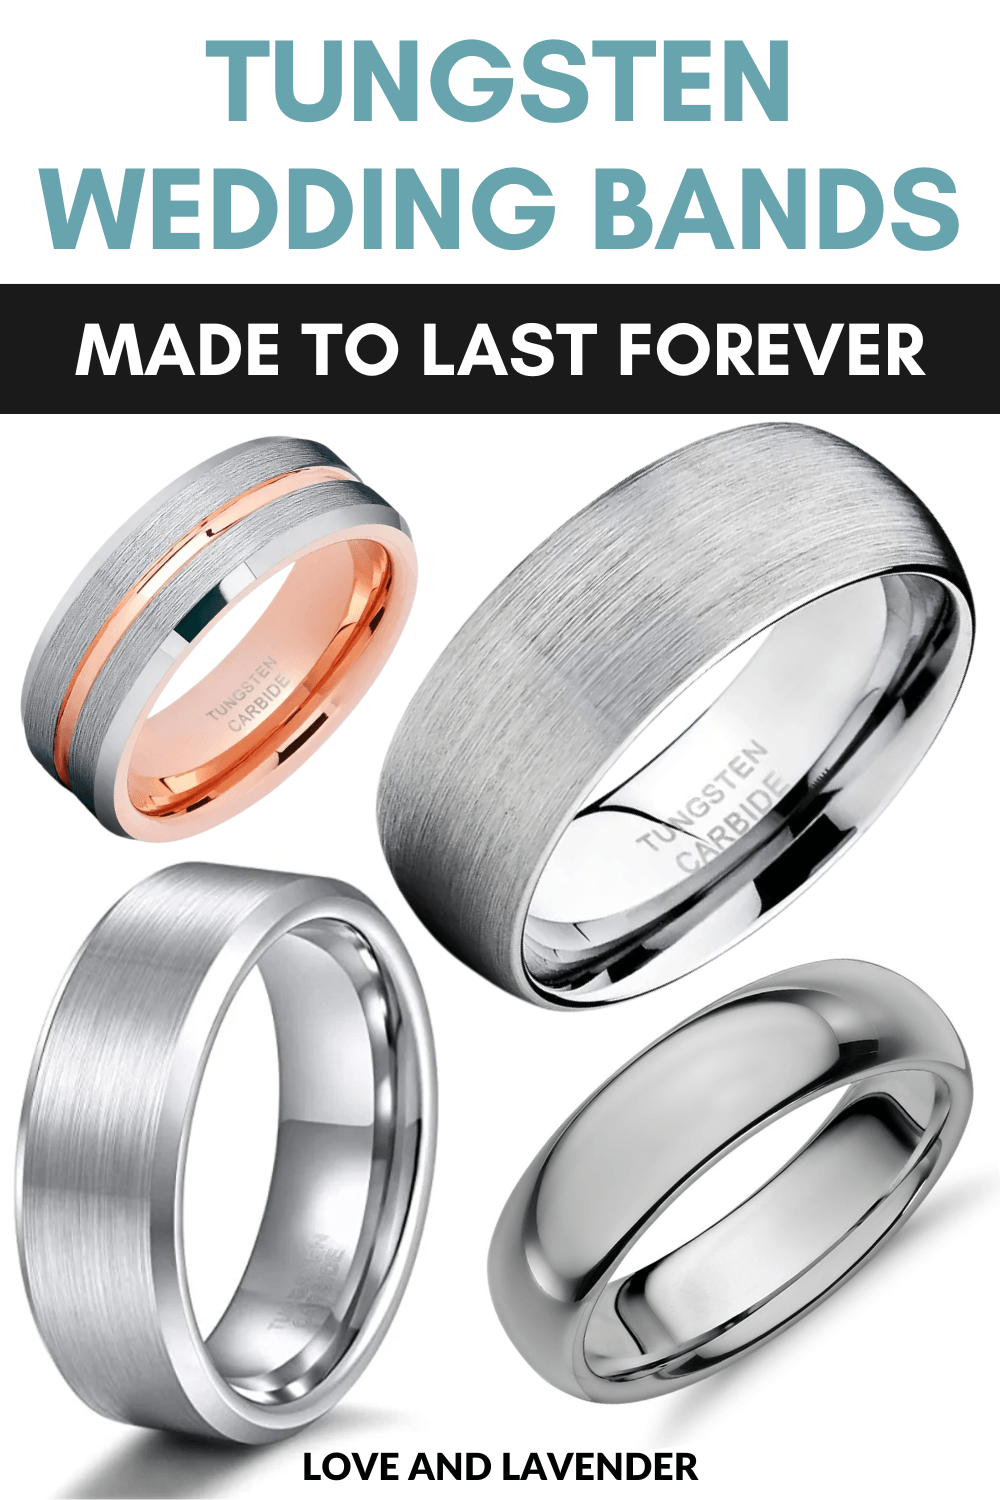 11 Tungsten Wedding Bands Made To Last Forever